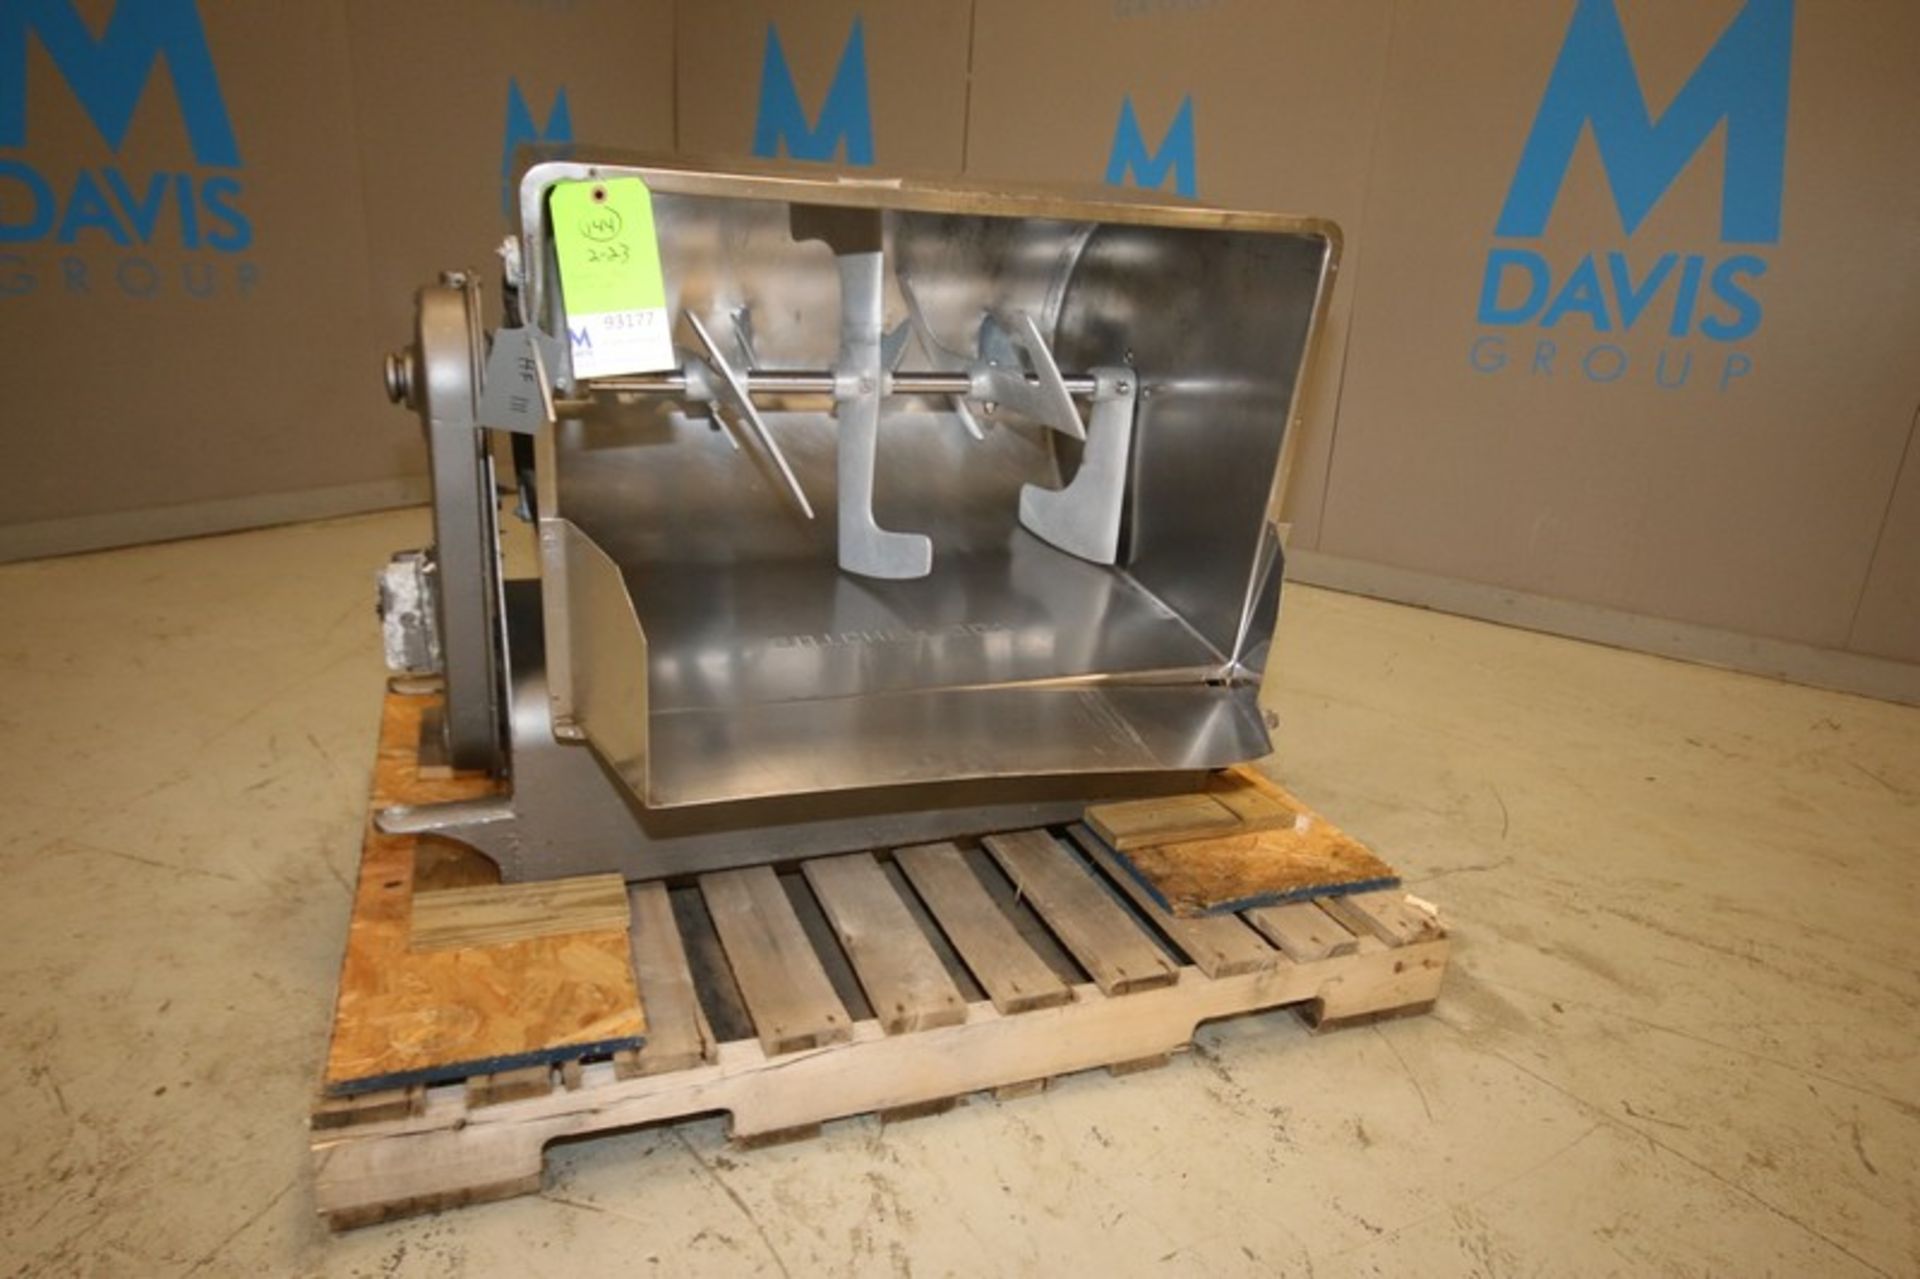 Butcher Boy 31" L x 20" W x 23" D Horizontal S/S Meat Mixer, Possibly Model 150, with Casters, (